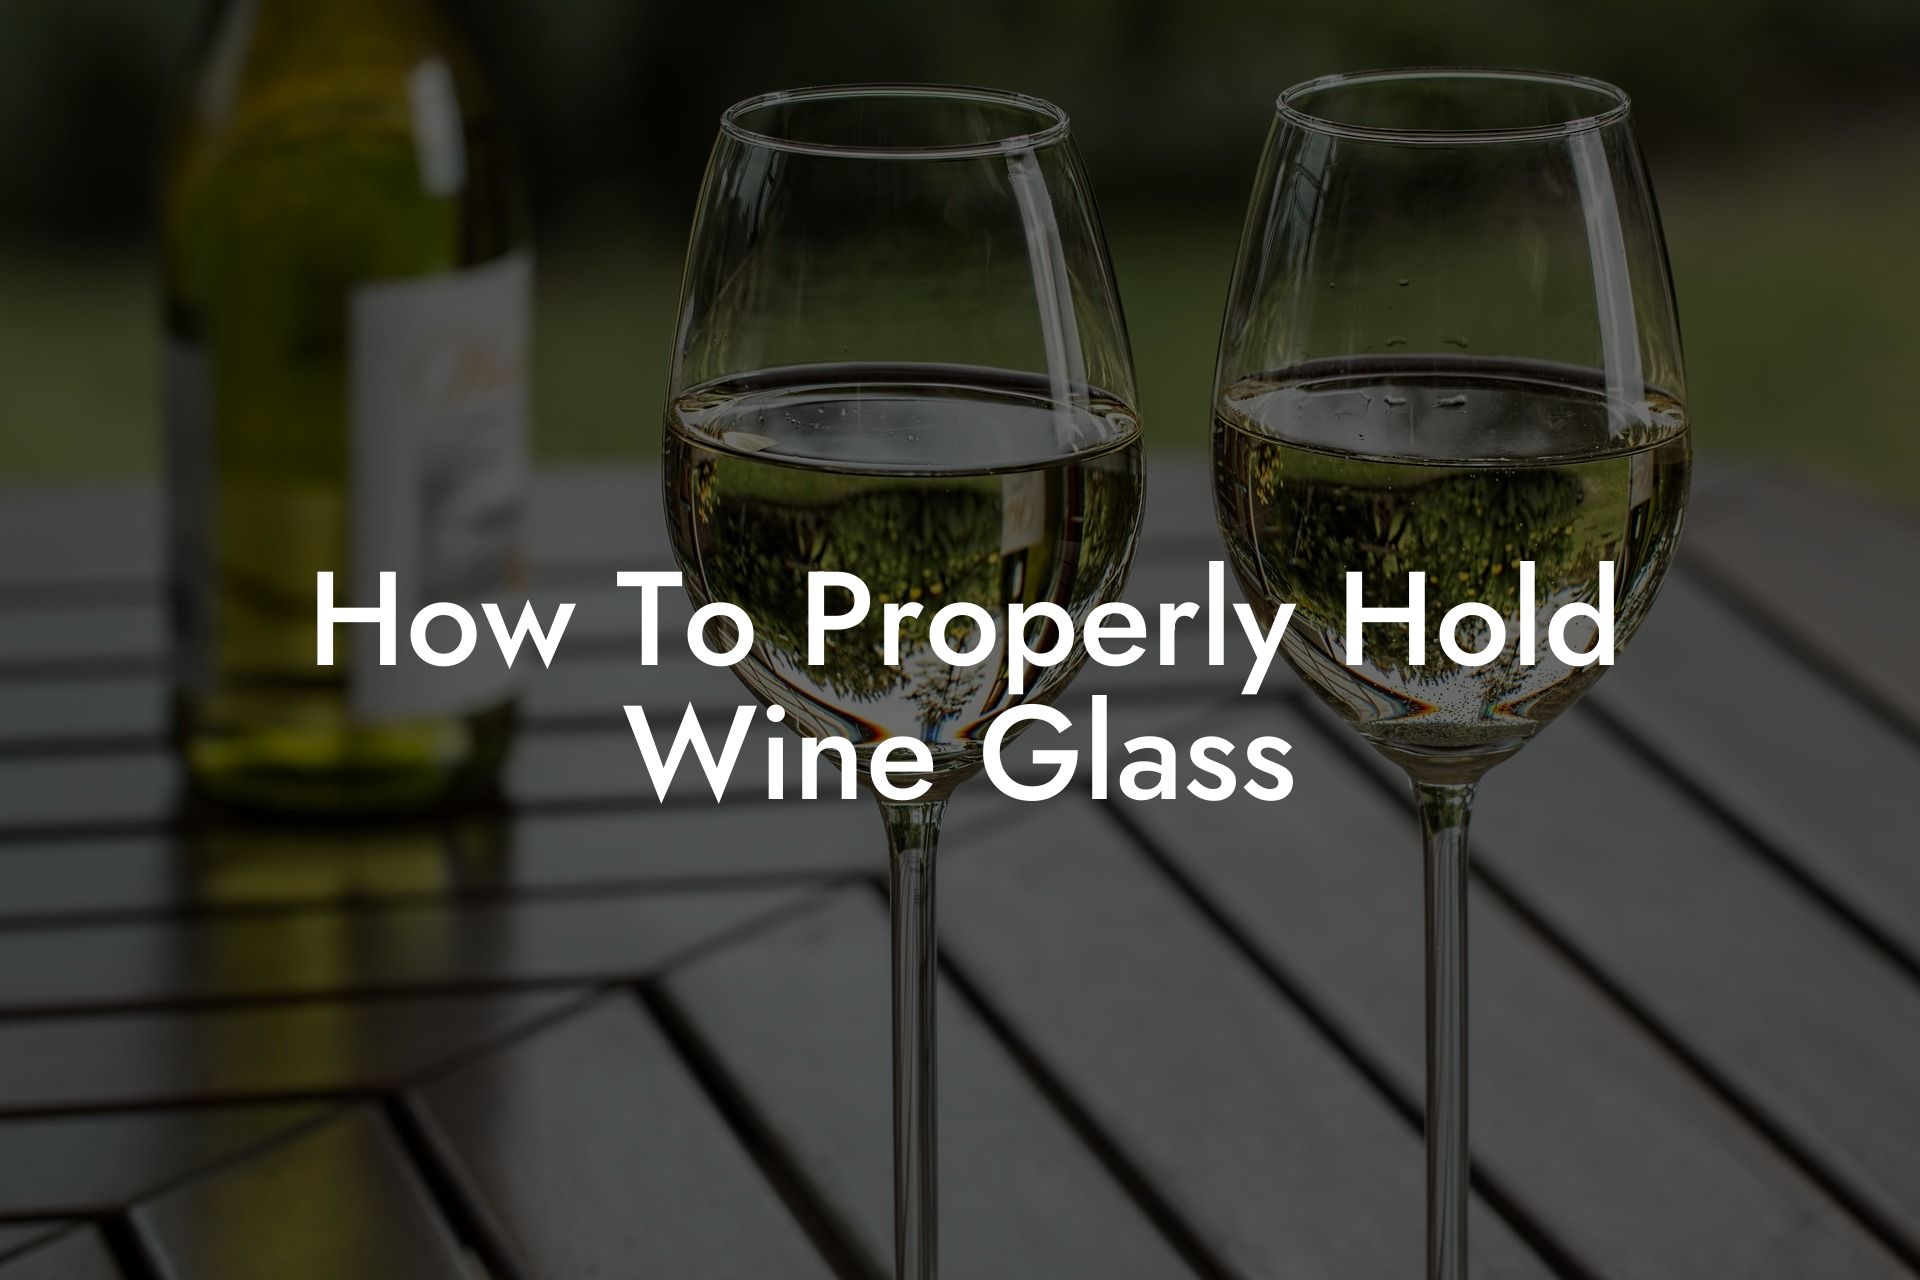 How To Properly Hold Wine Glass